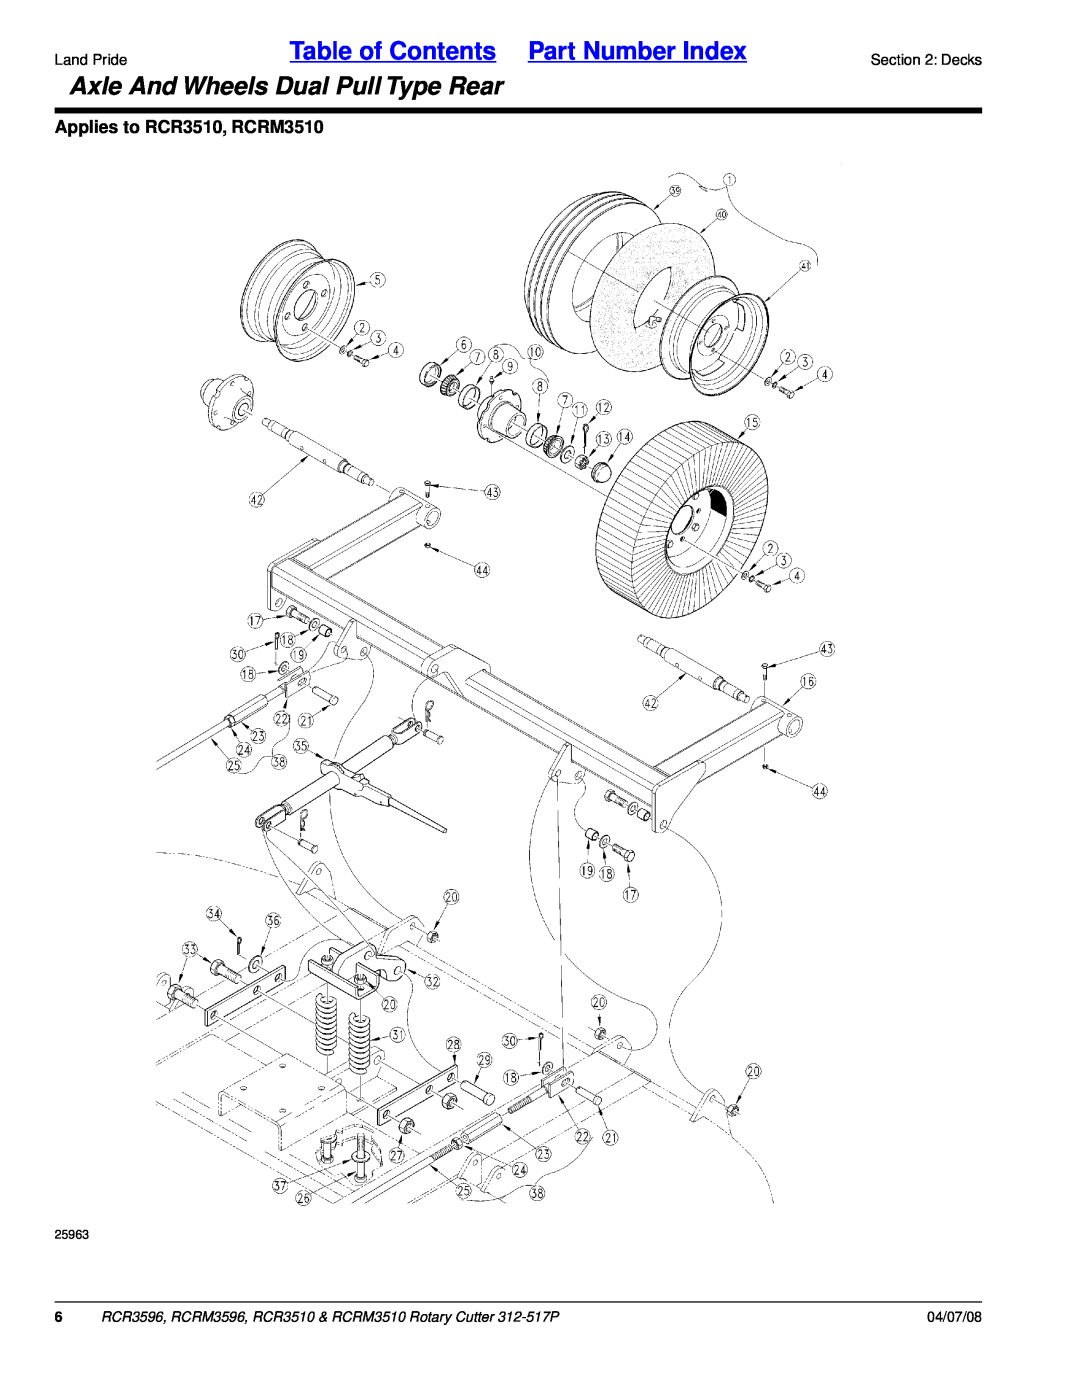 Land Pride RCRM3596 Axle And Wheels Dual Pull Type Rear, Applies to RCR3510, RCRM3510, Table of Contents Part Number Index 